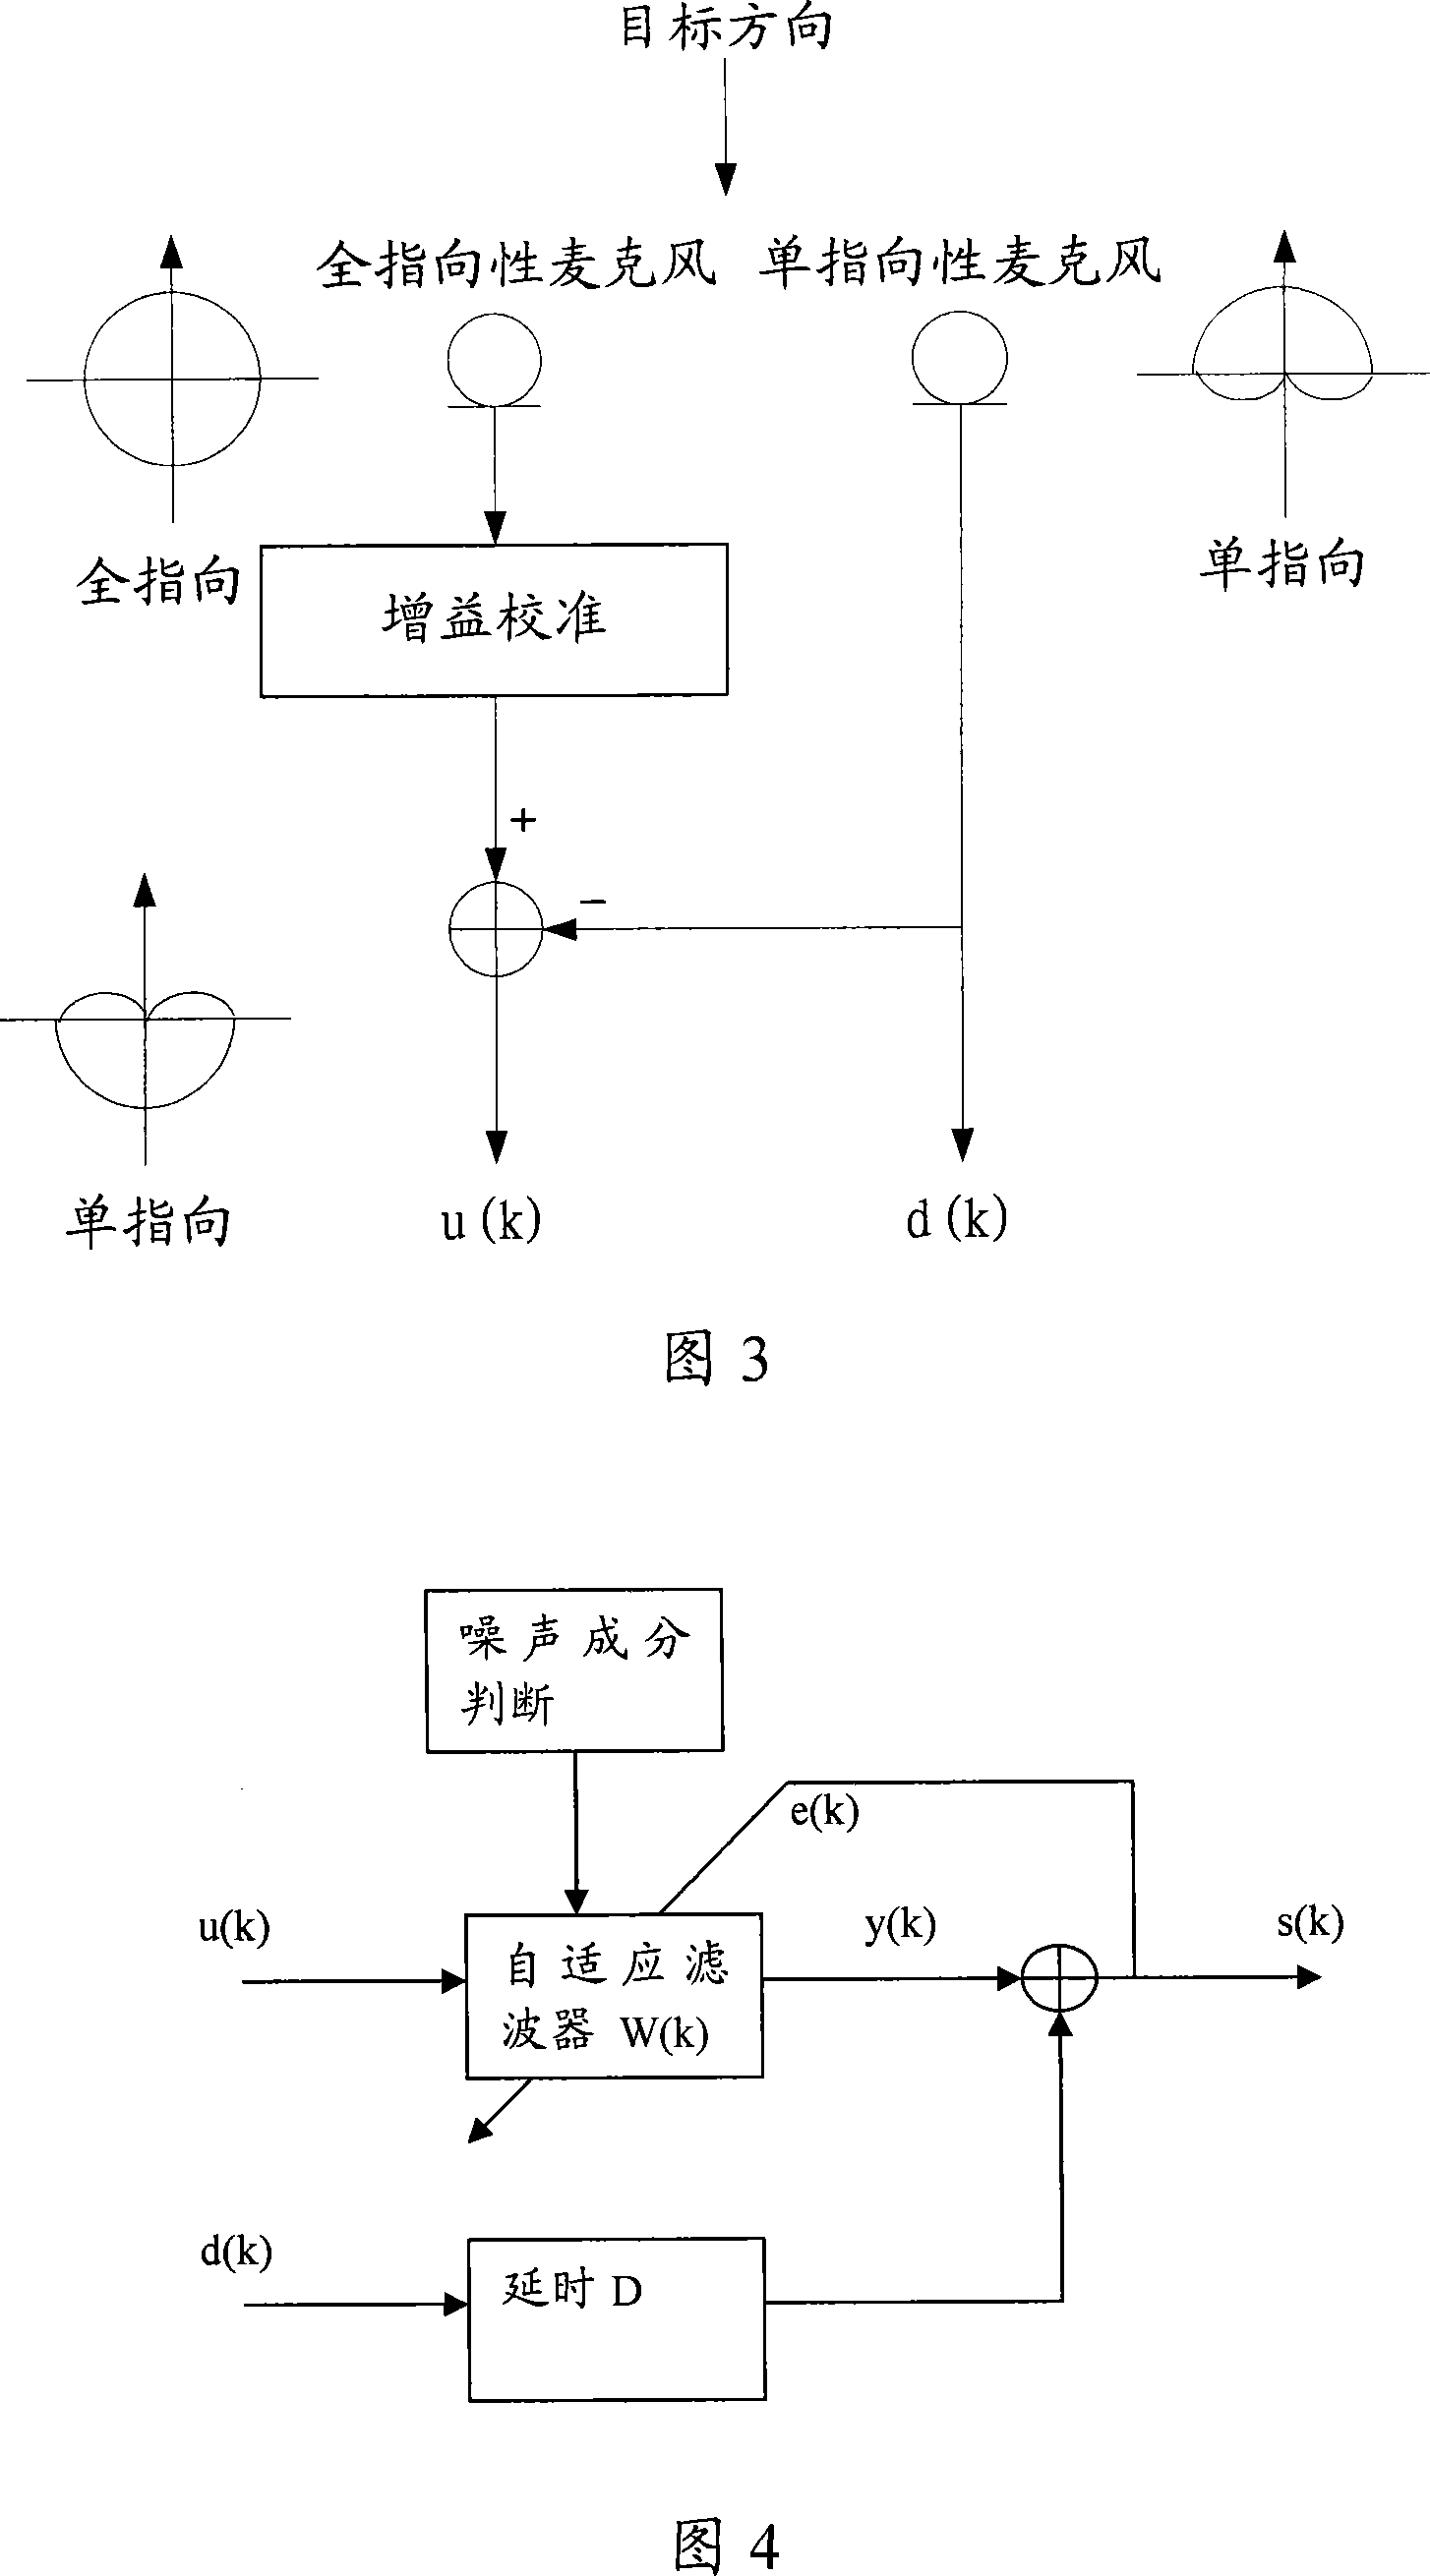 Method and apparatus for noise elimination of microphone array